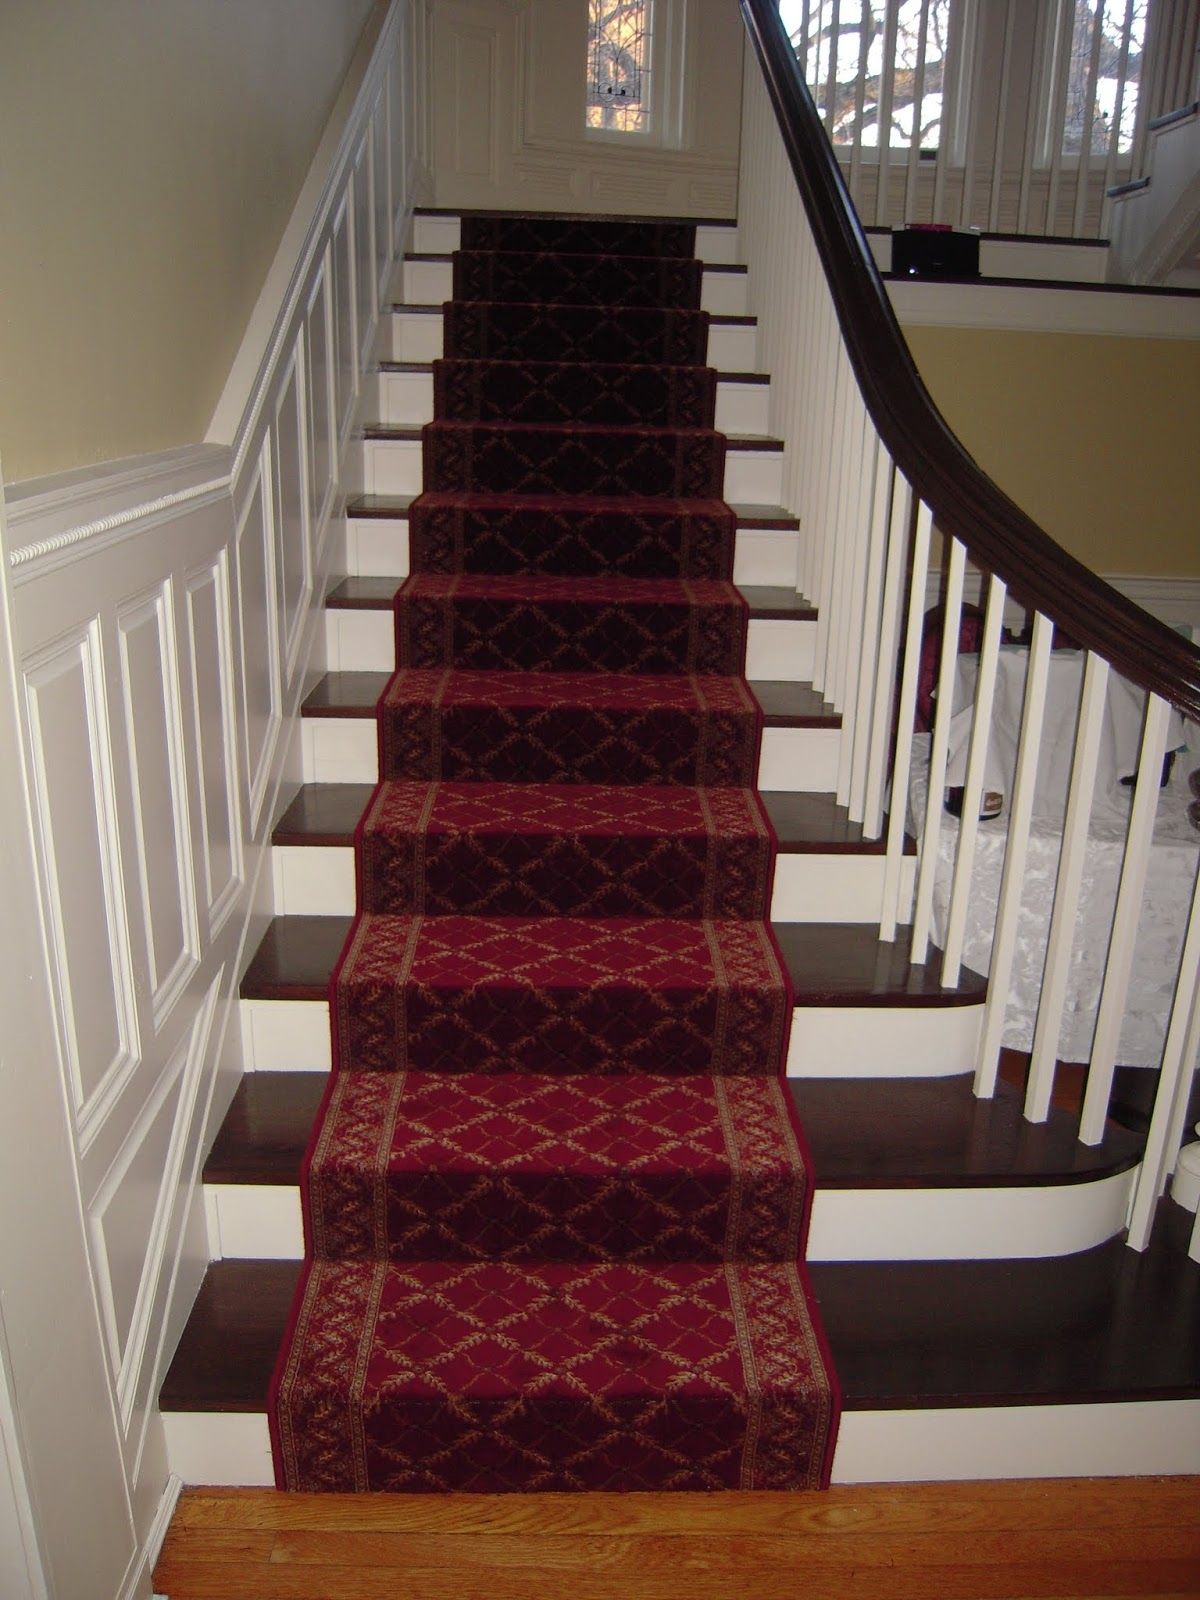 Carpet Runner For Stairs For Carpet Runners For Stairs And Hallways (View 13 of 20)